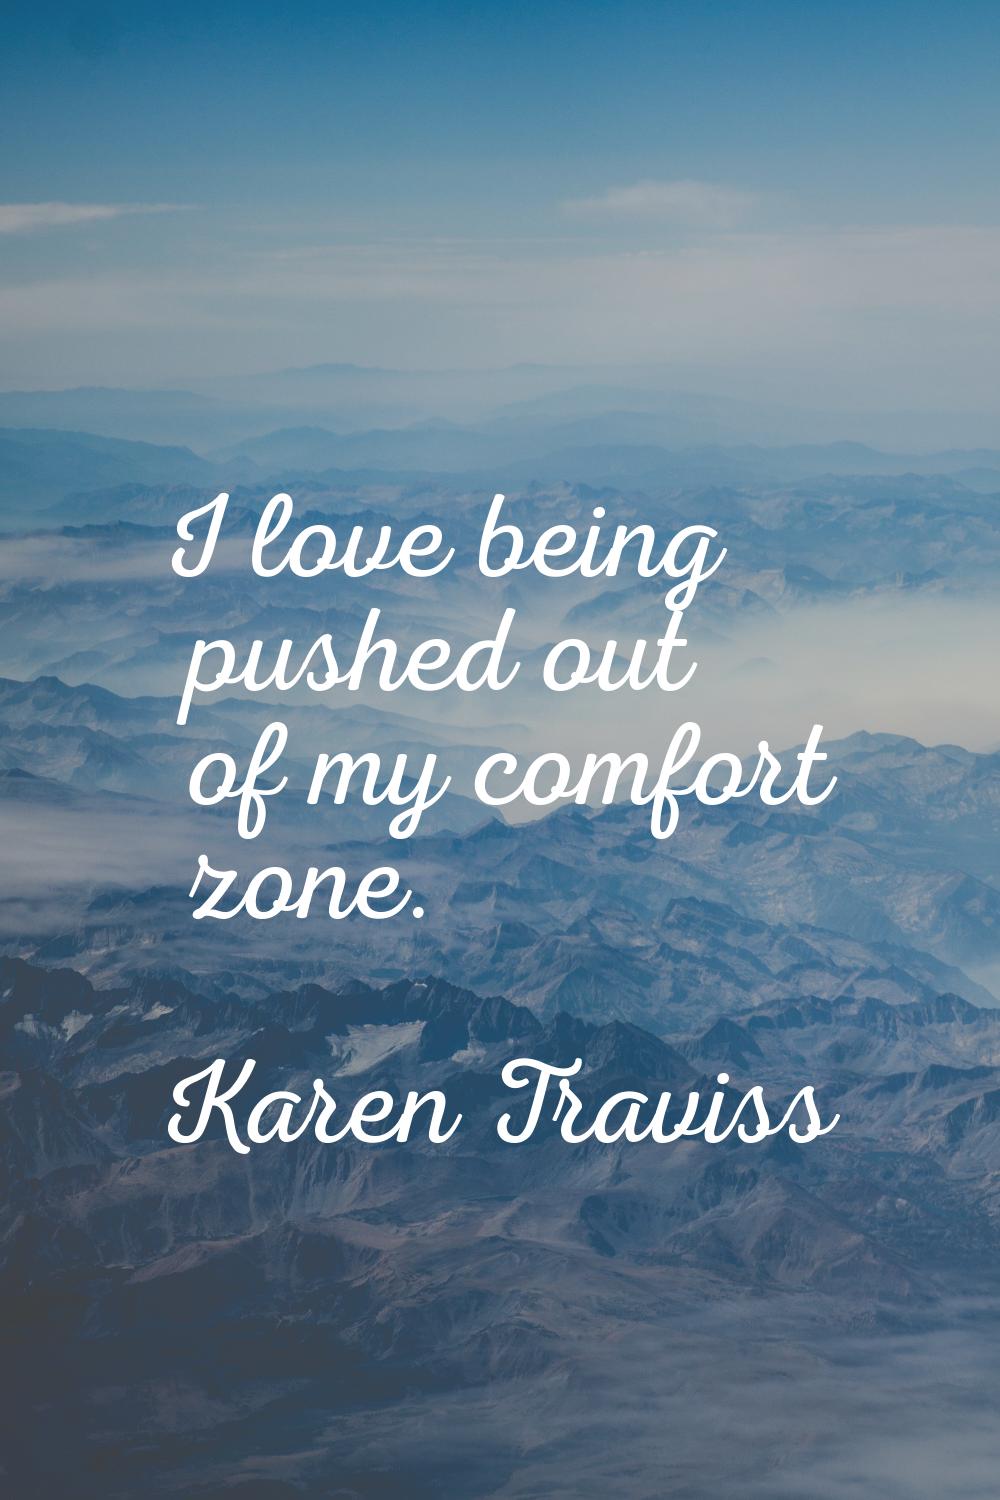 I love being pushed out of my comfort zone.